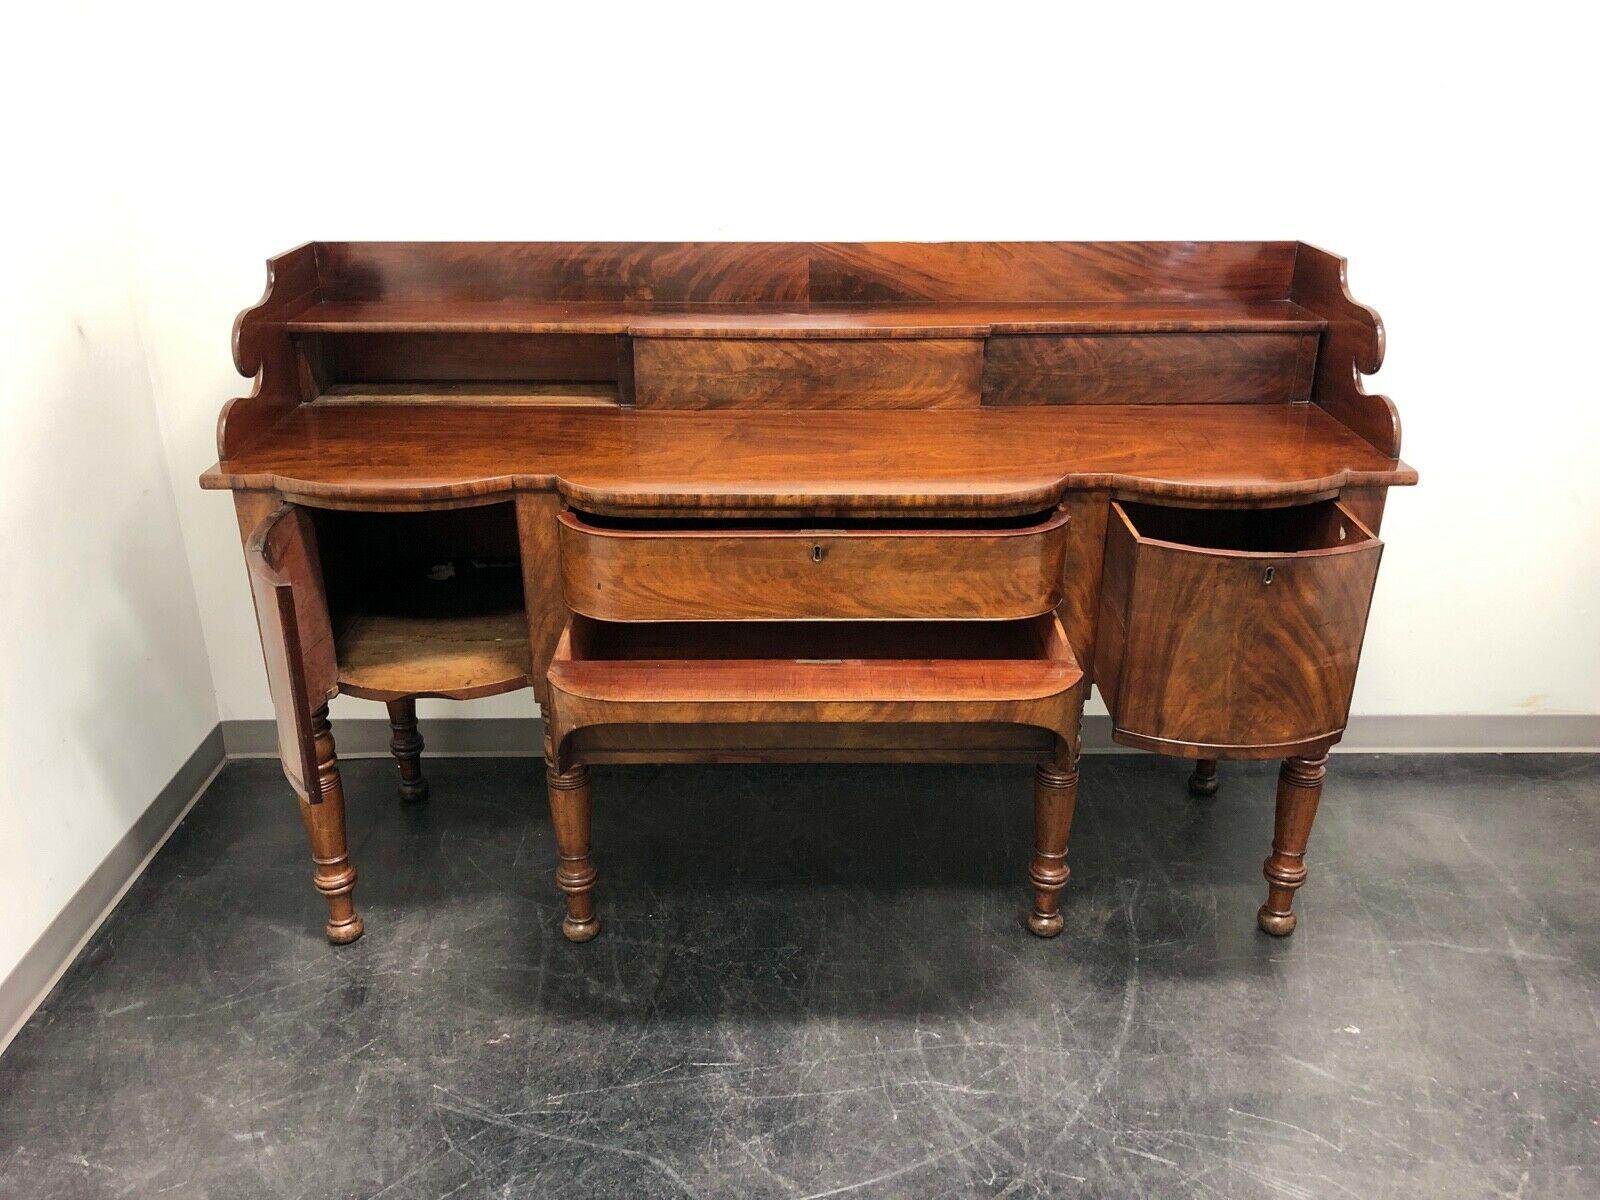 An Irish sideboard in Mahogany, circa 1800. Dovetail construction with turned legs. Purchased from an antique shop in 2003 for $12,000. Made in Ireland.

Measures: Overall: 78 W 28.5 D 48.75 H, Serving surface: 38 H

Good antique condition. Some